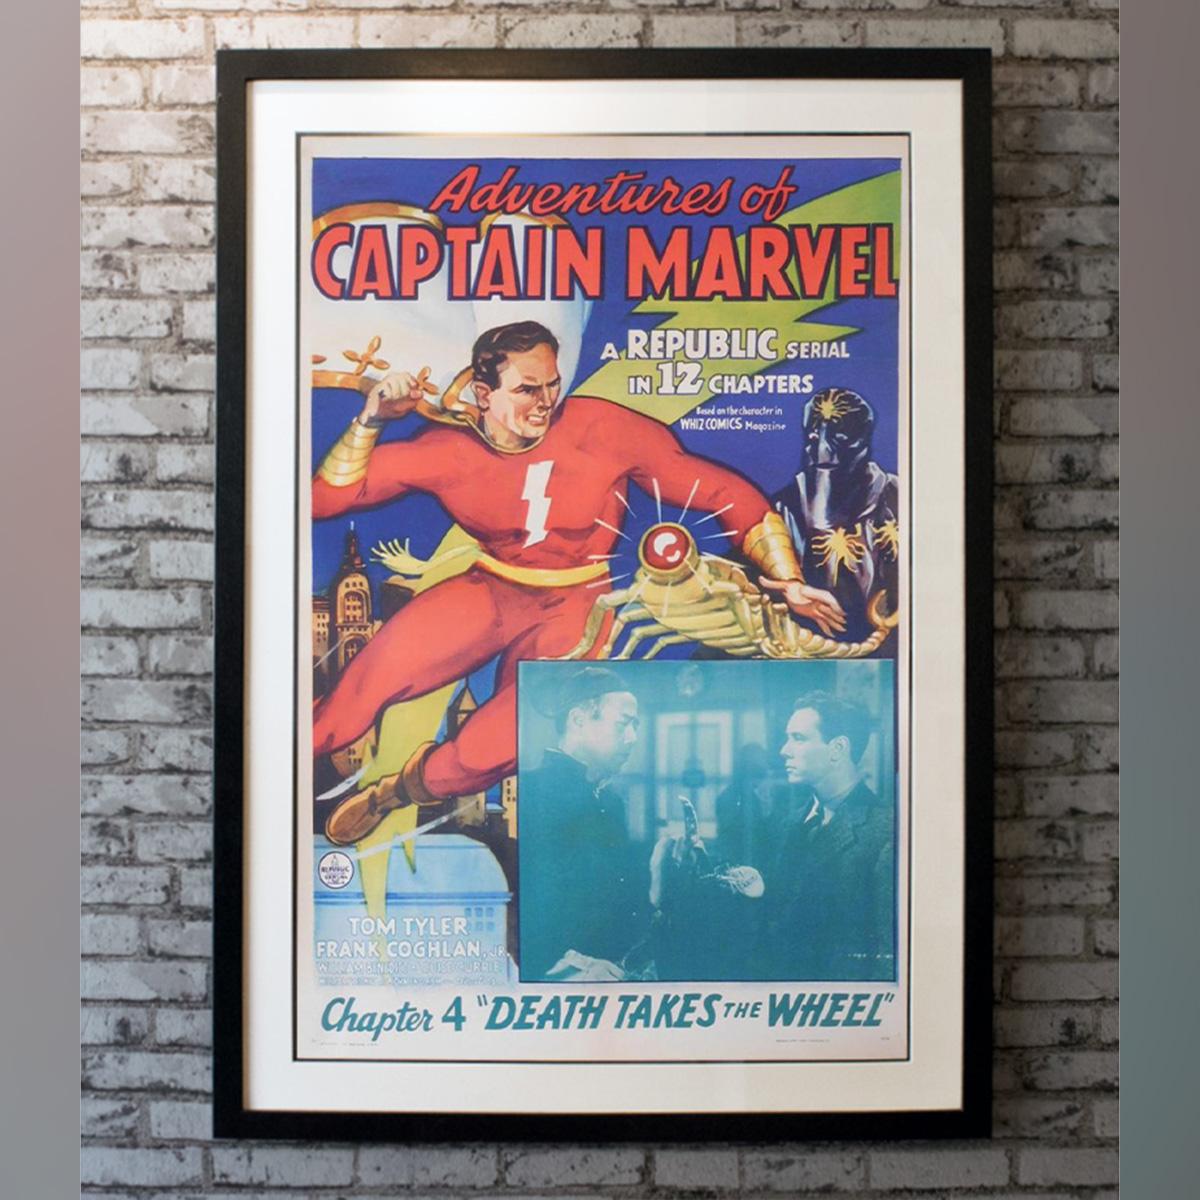 Adventures of Captain Marvel is a 1941 American 12-chapter black-and-white movie serial from Republic Pictures, produced by Hiram S. Brown, Jr., directed by John English and William Witney, that stars Tom Tyler in the title role of Captain Marvel